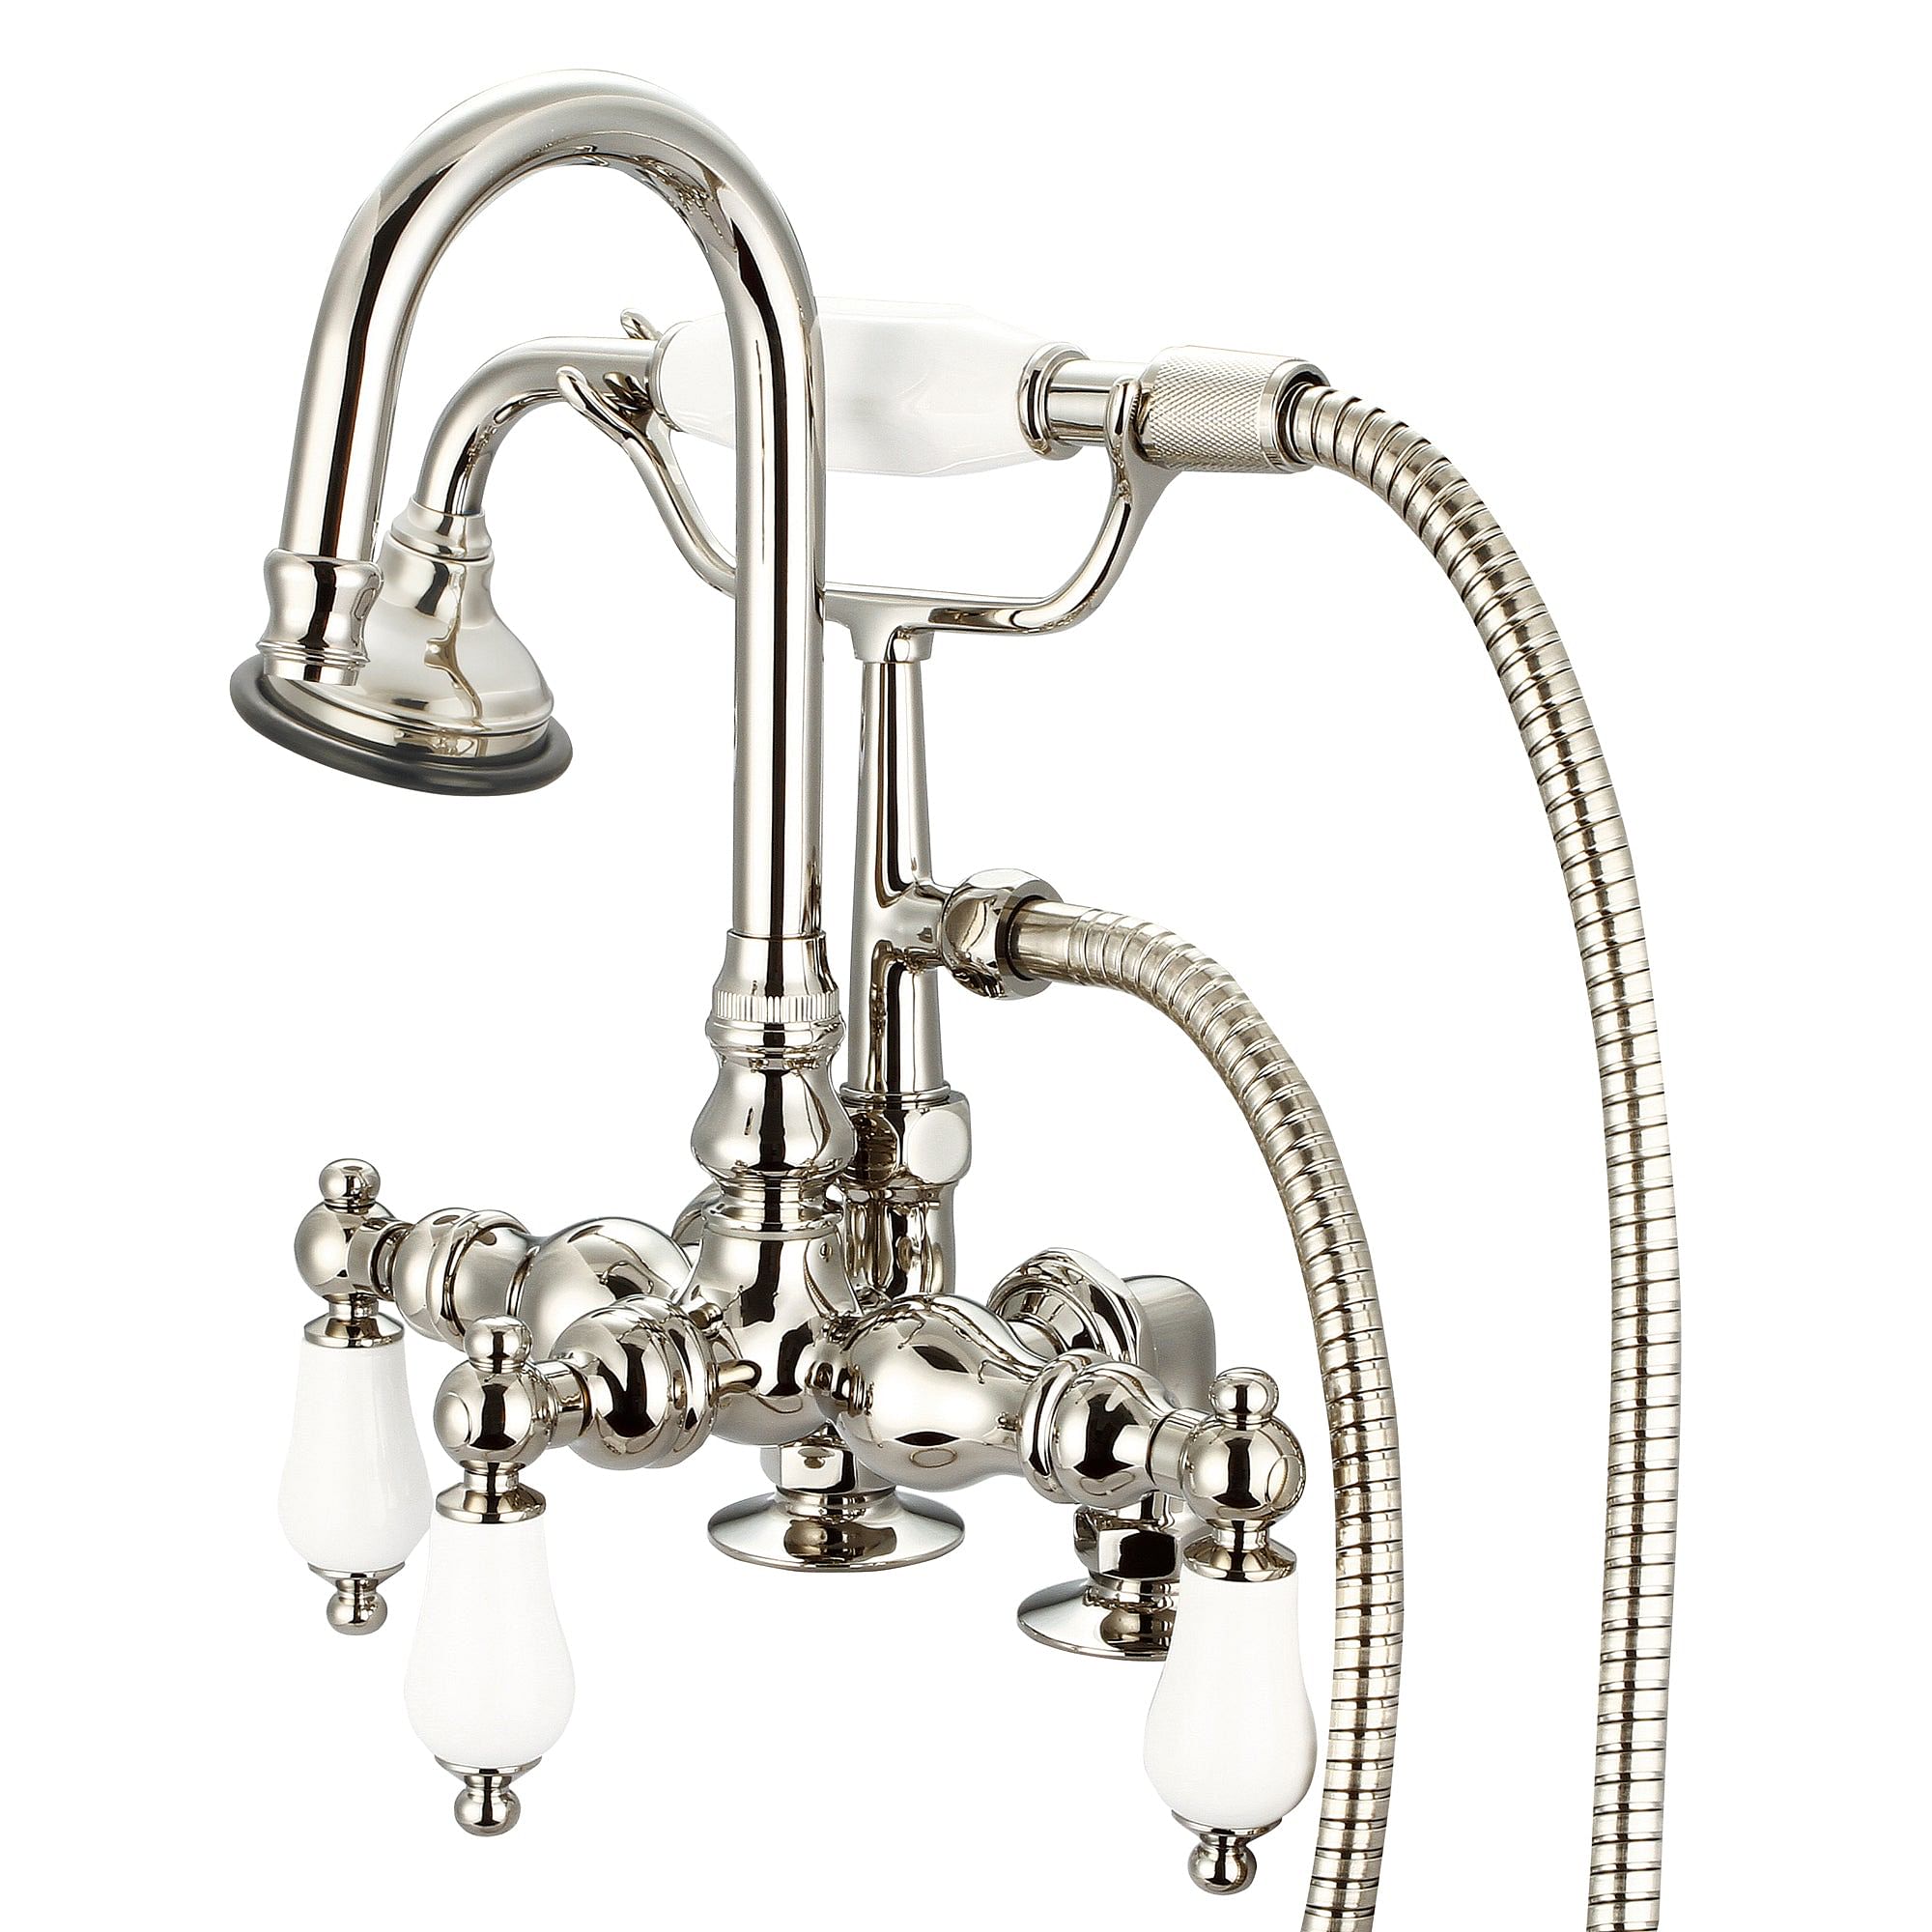 Vintage Classic 3.375 Inch Center Deck Mount Tub Faucet With Gooseneck Spout, 2 Inch Risers & Handheld Shower in Polished Nickel (PVD) Finish With Porcelain Lever Handles Without labels